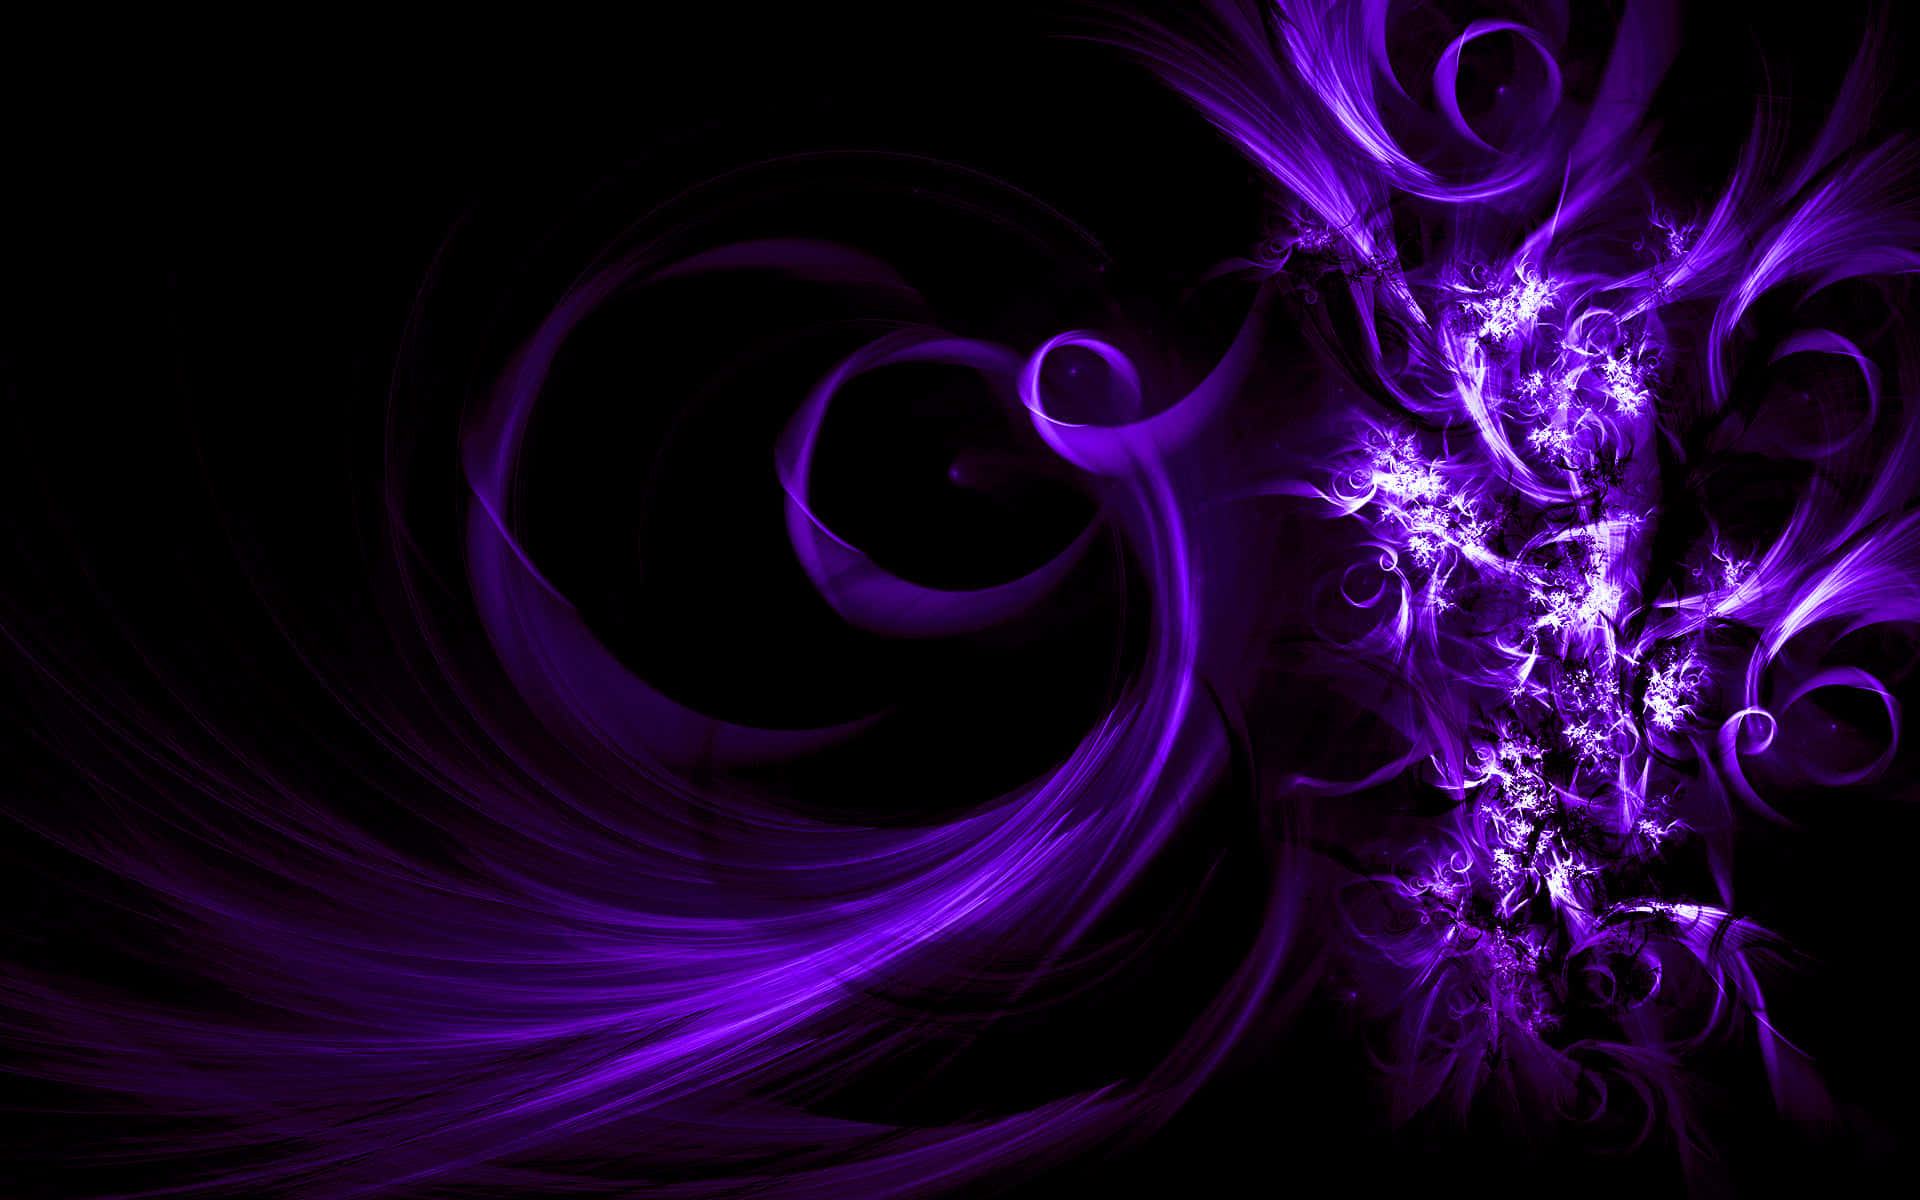 "Abstract shades of purple mesmerize the mind in a tranquil way." Wallpaper